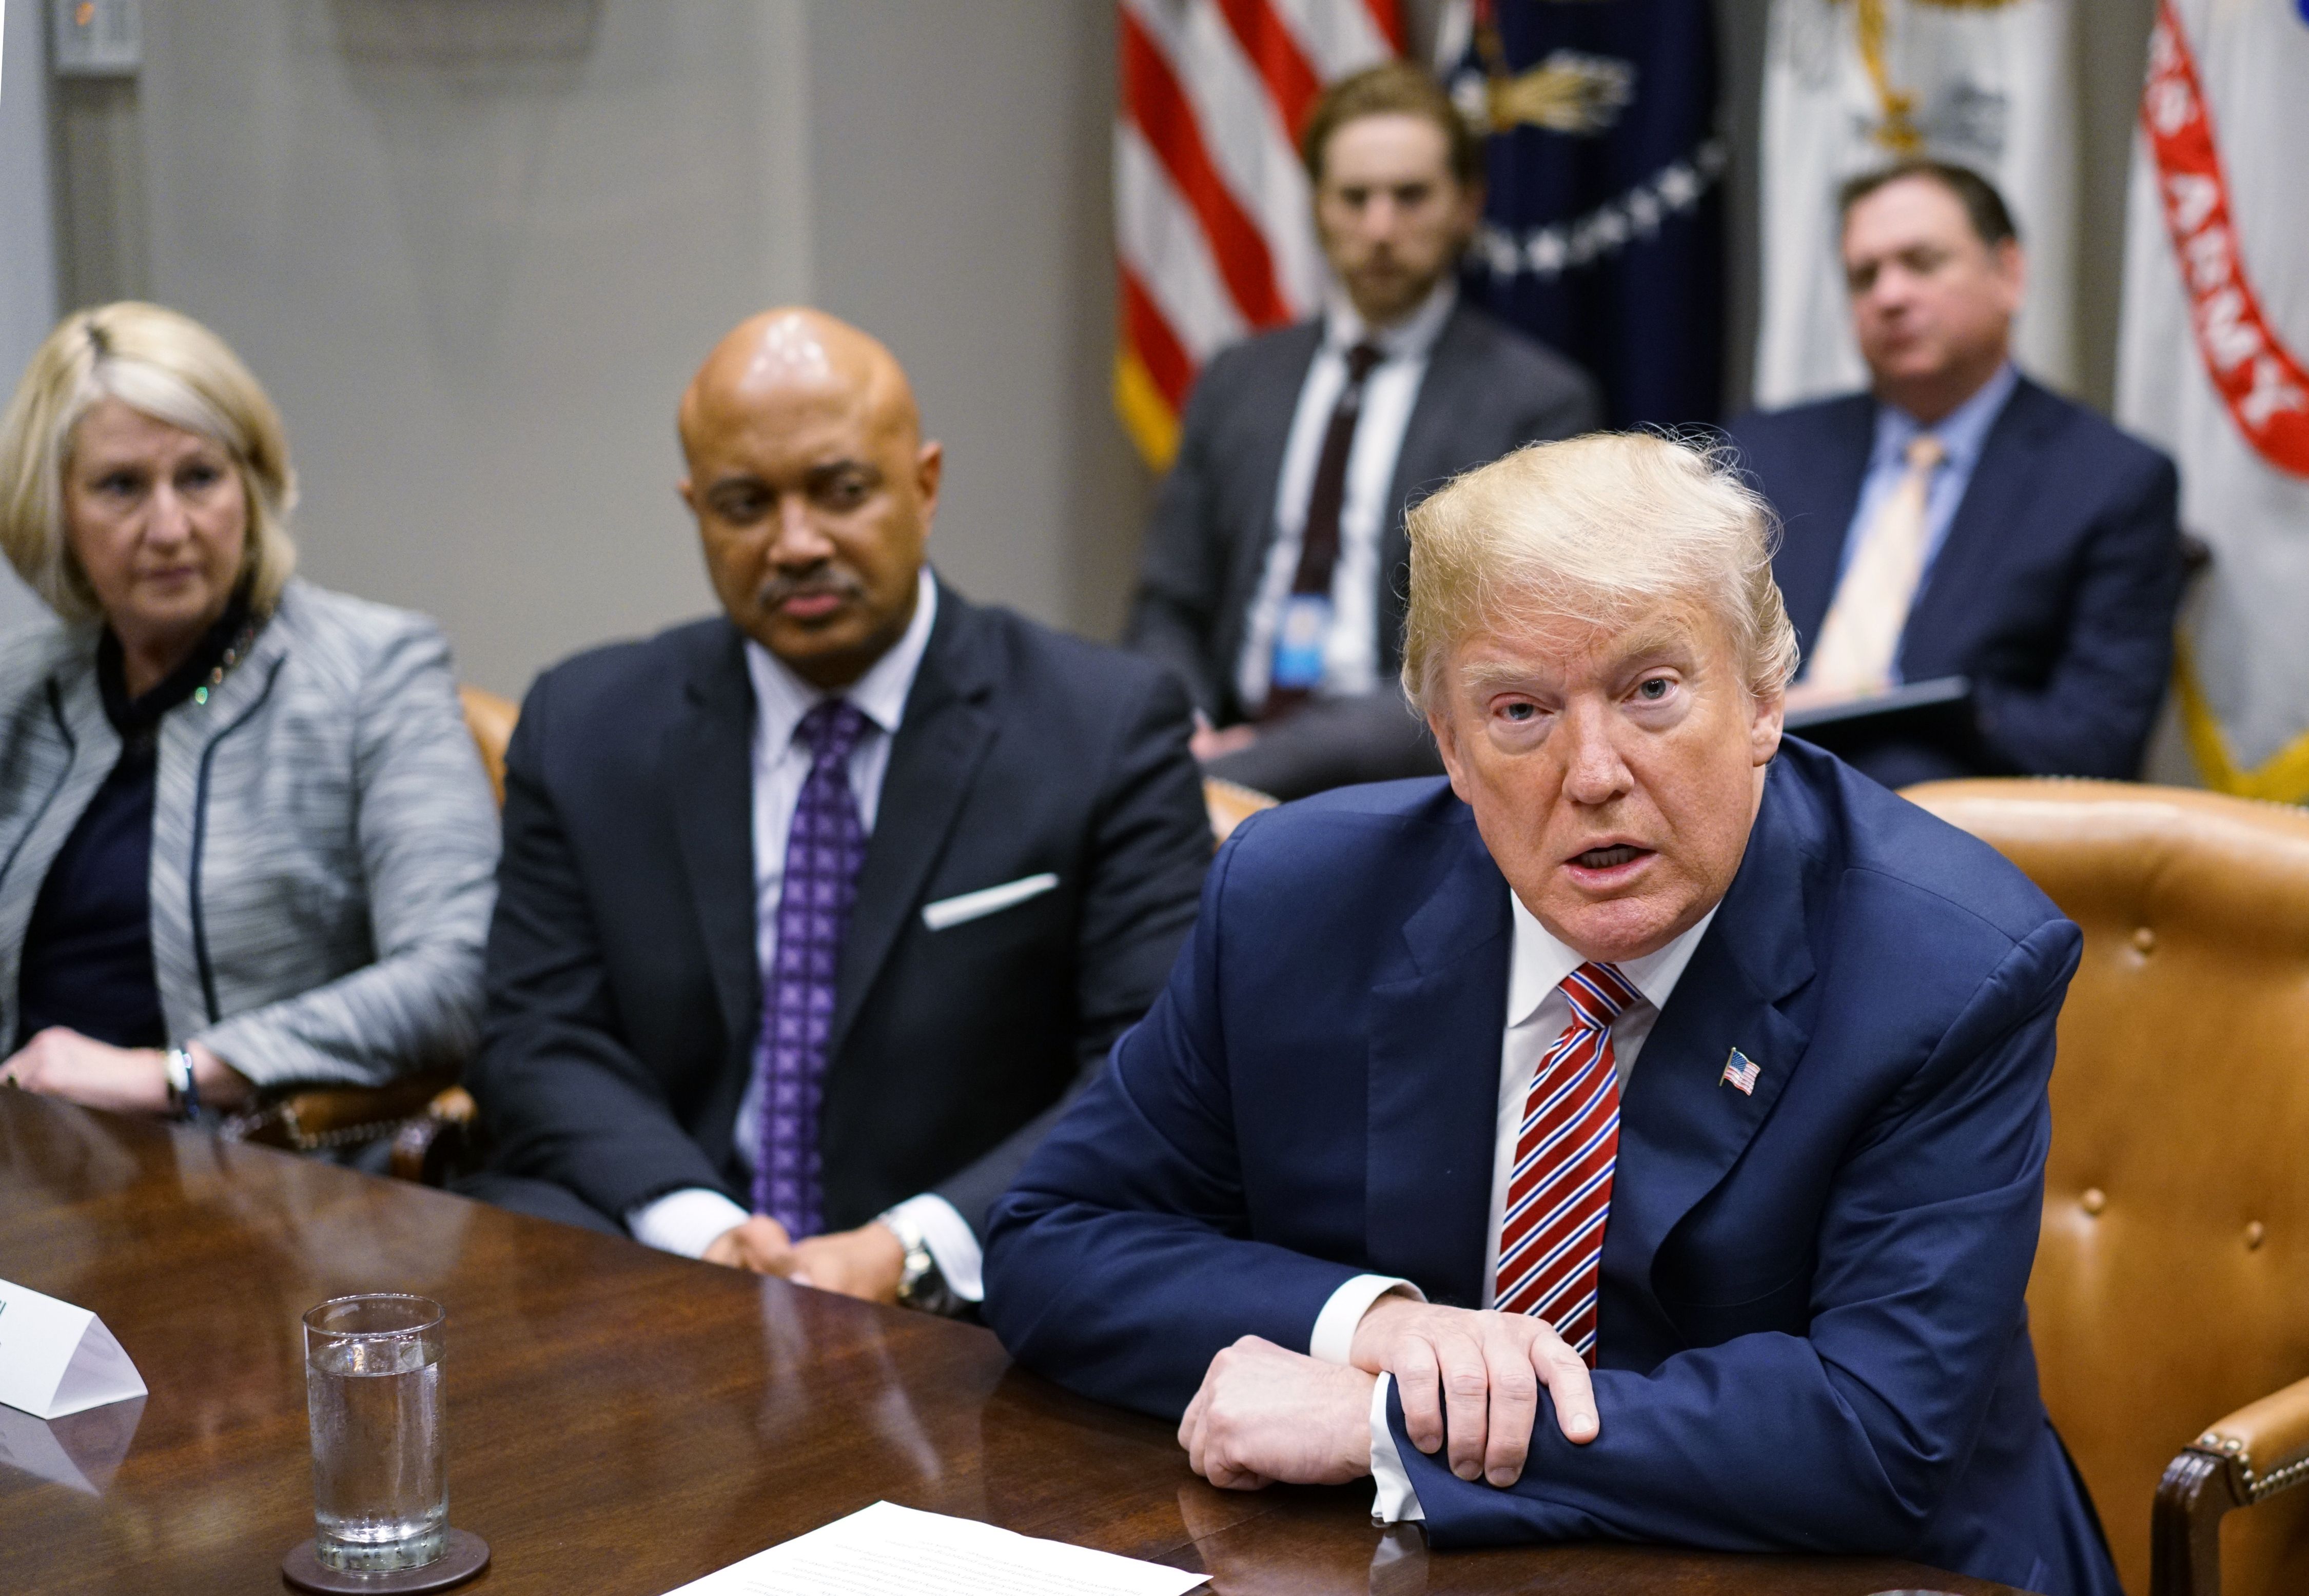 US President Donald Trump speaks during a meeting with state and local officials on school safety in the Roosevelt Room of the White House on February 22, 2018 in Washington, DC. From left are Florida Education Department Commissioner Pam Stewart, and Indiana Attorney General Curtis Hill. / AFP PHOTO / MANDEL NGAN (Photo credit should read MANDEL NGAN/AFP/Getty Images)